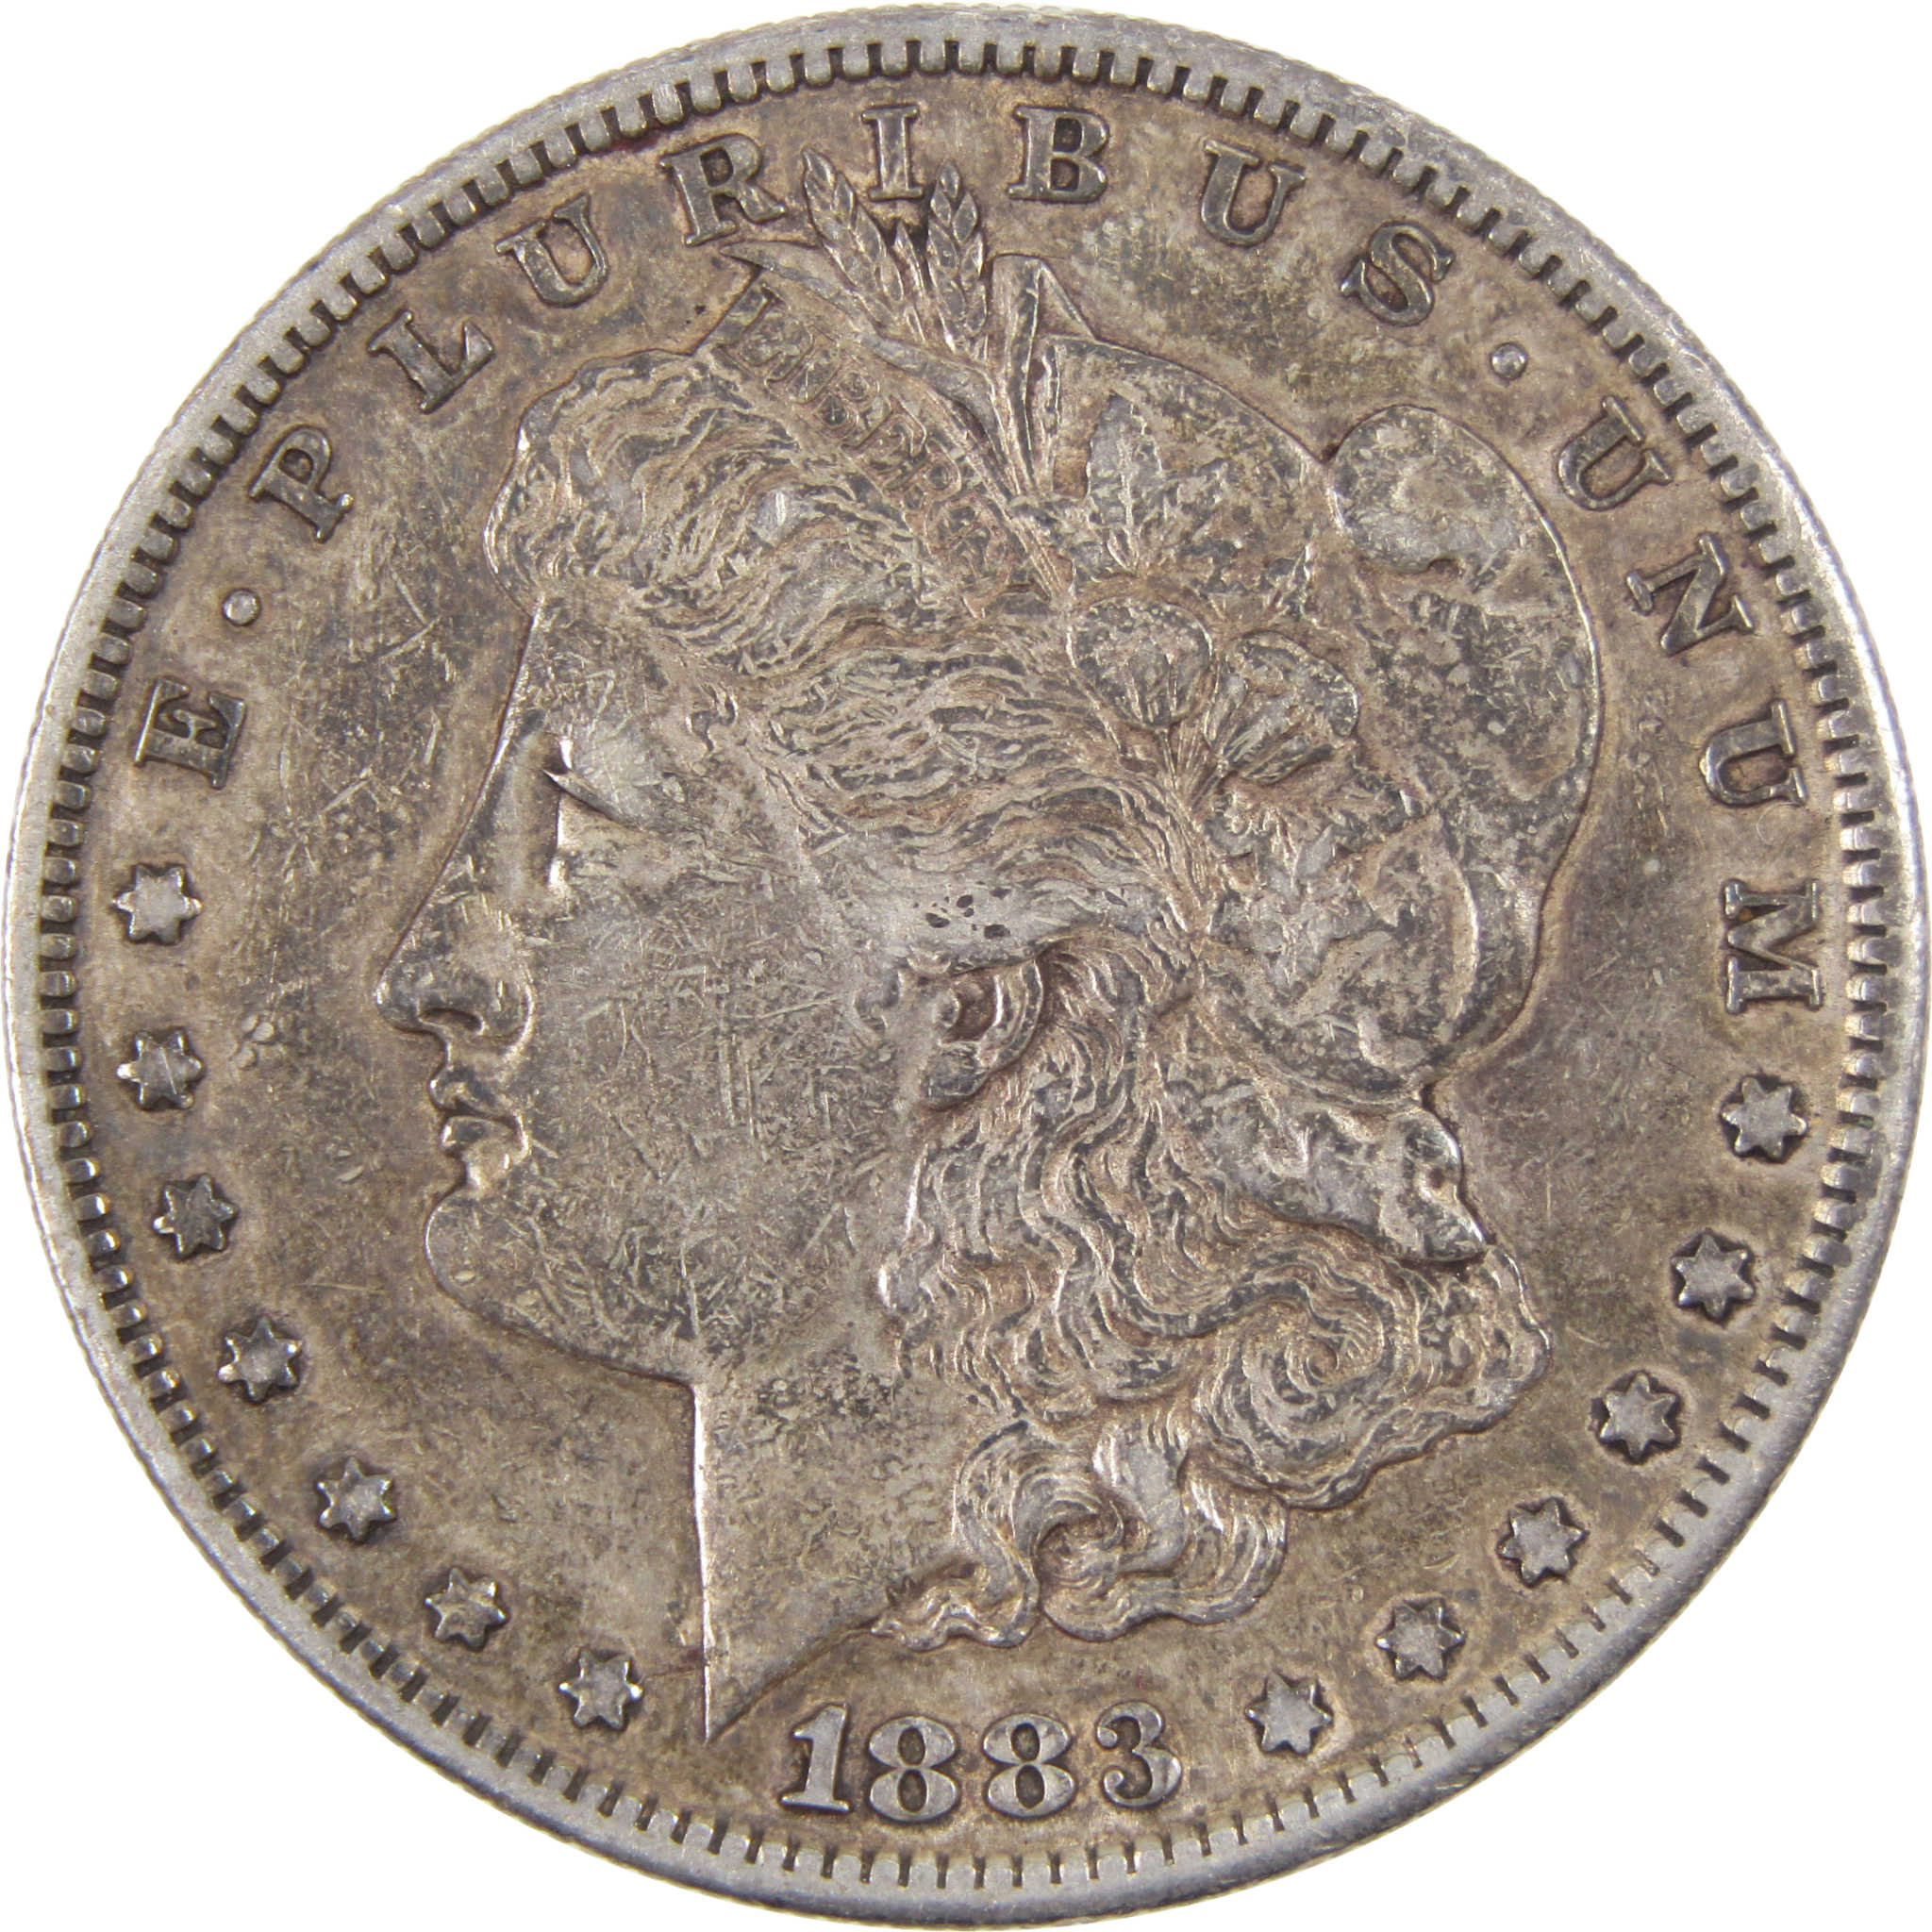 1883 S Morgan Dollar XF EF Extremely Fine 90% Silver Coin SKU:I2896 - Morgan coin - Morgan silver dollar - Morgan silver dollar for sale - Profile Coins &amp; Collectibles